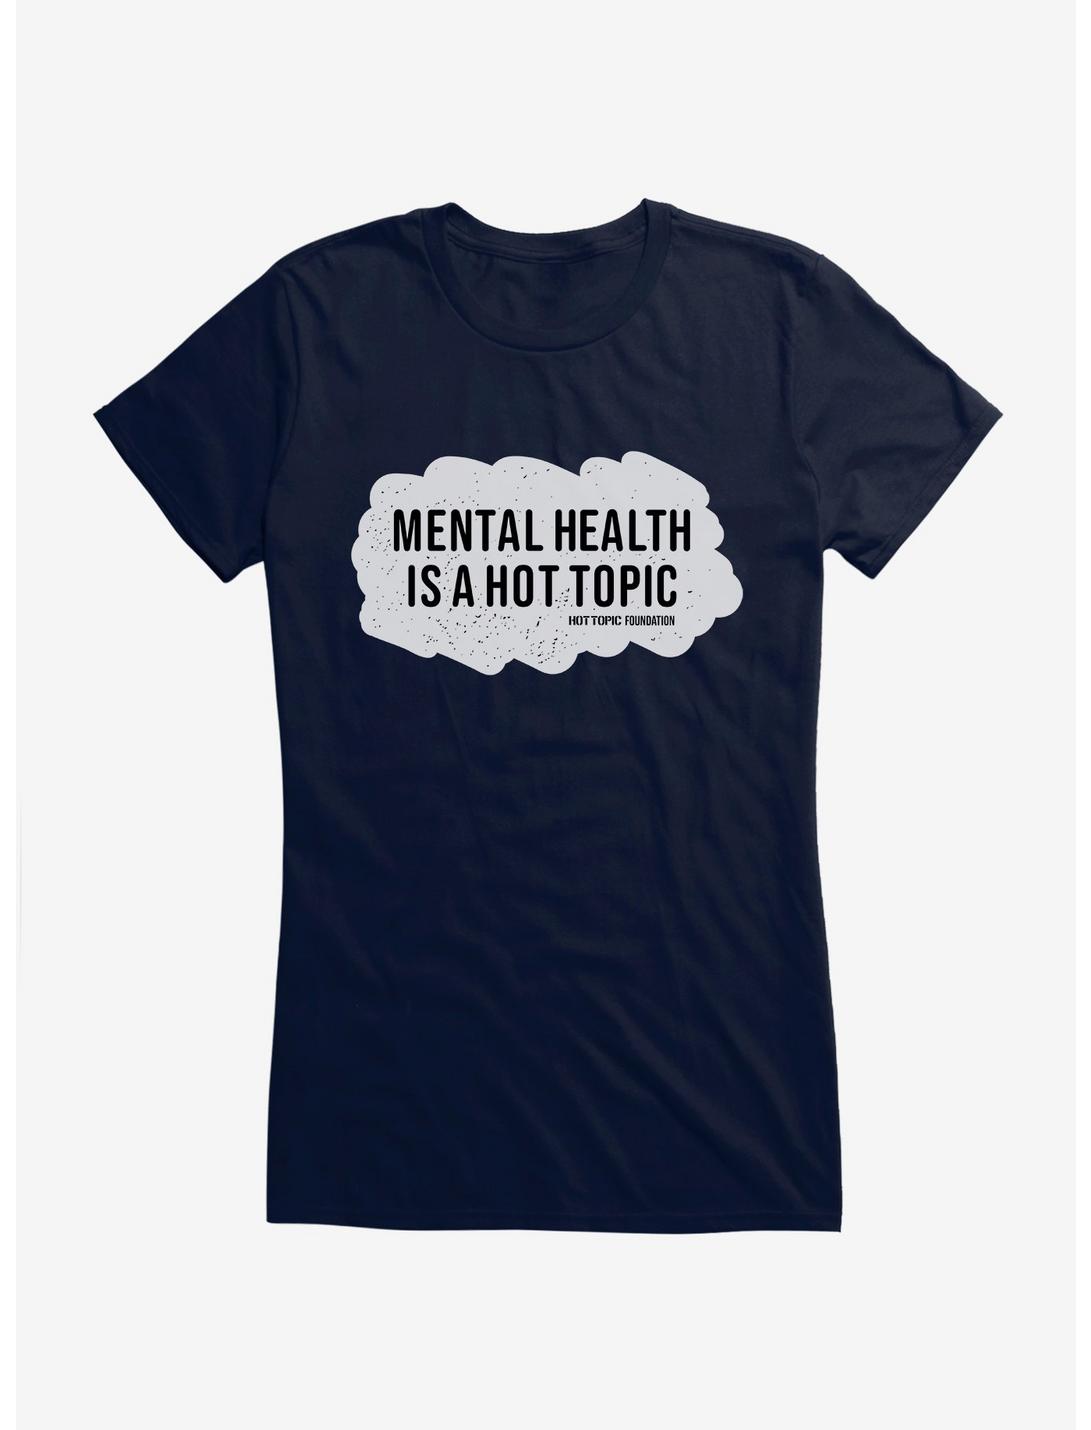 Hot Topic Foundation Mental Health Is A Hot Topic Girls T-Shirt, NAVY, hi-res